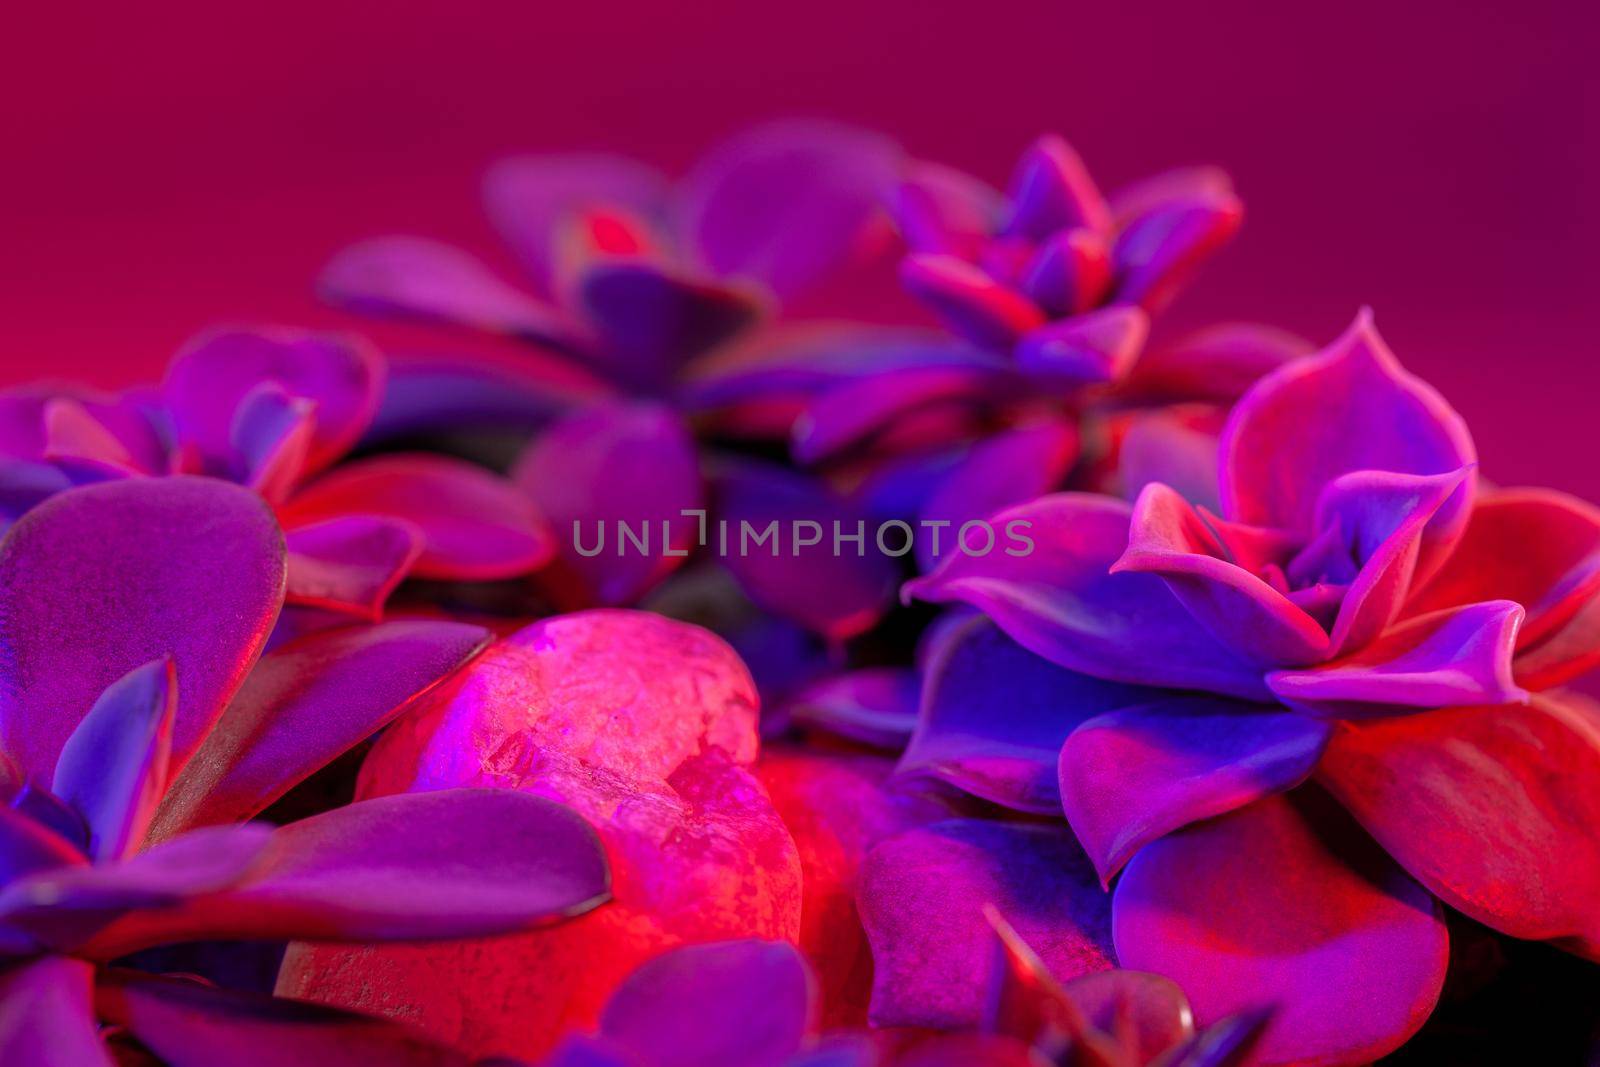 Succulent houseplants on dark pink background. Illuminated in red and blue. Close-up macro photo.